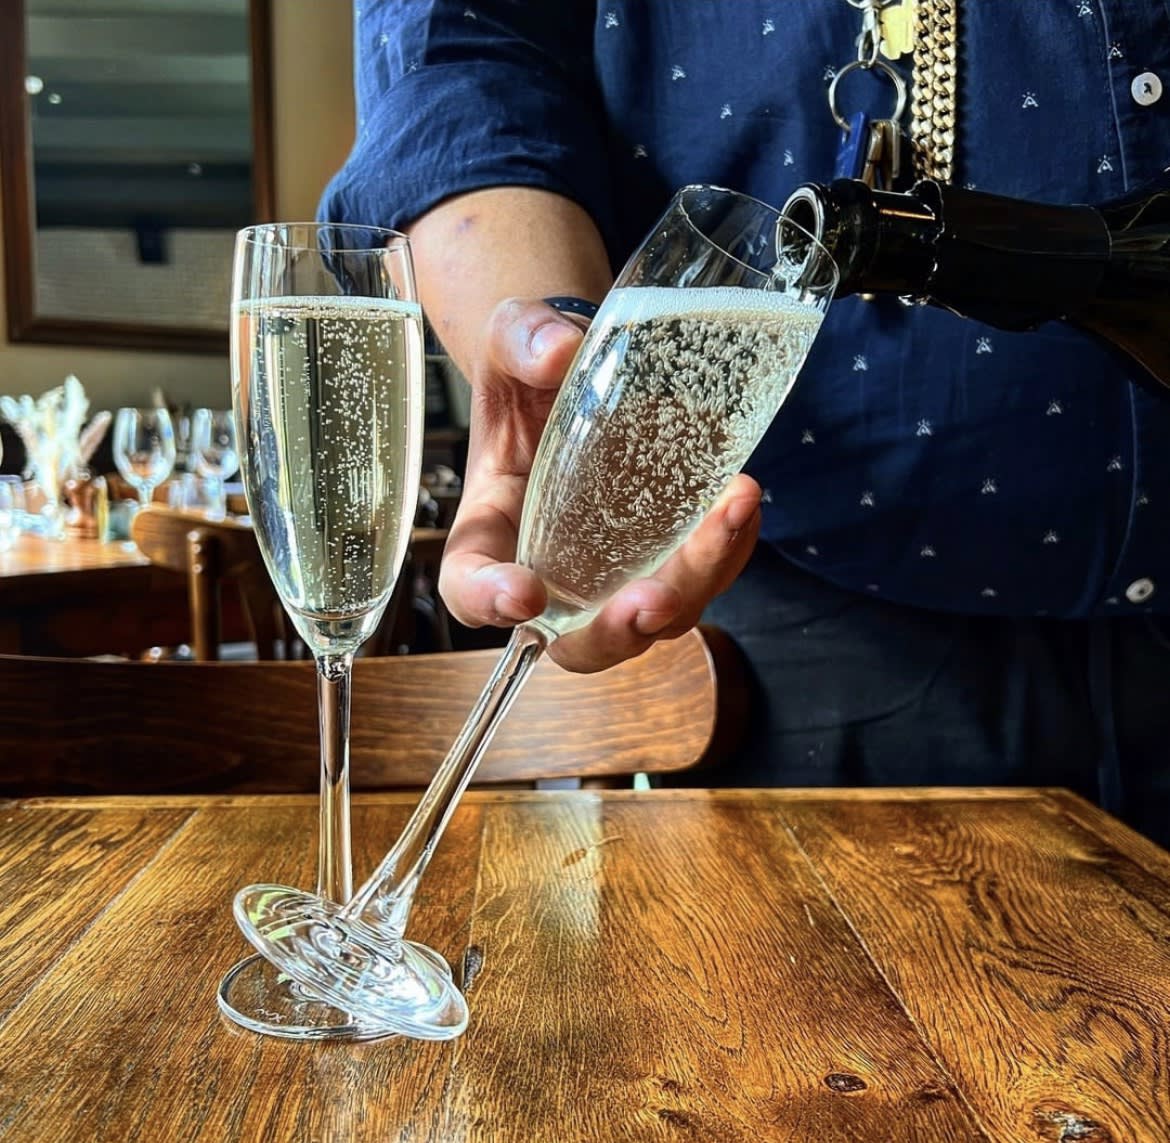 🫧 FIZZ FRIYAY 🫧
Join us for bottle of bubbles for only £20! And start your weekend properly 😎
.
.
.
#tulsehillhotel #tulsehill #hernehill #brockwellpark #lambeth #prosecco #weekend #weekendvibes #se24 #southlondon #tothepub #beergarden #gastropub